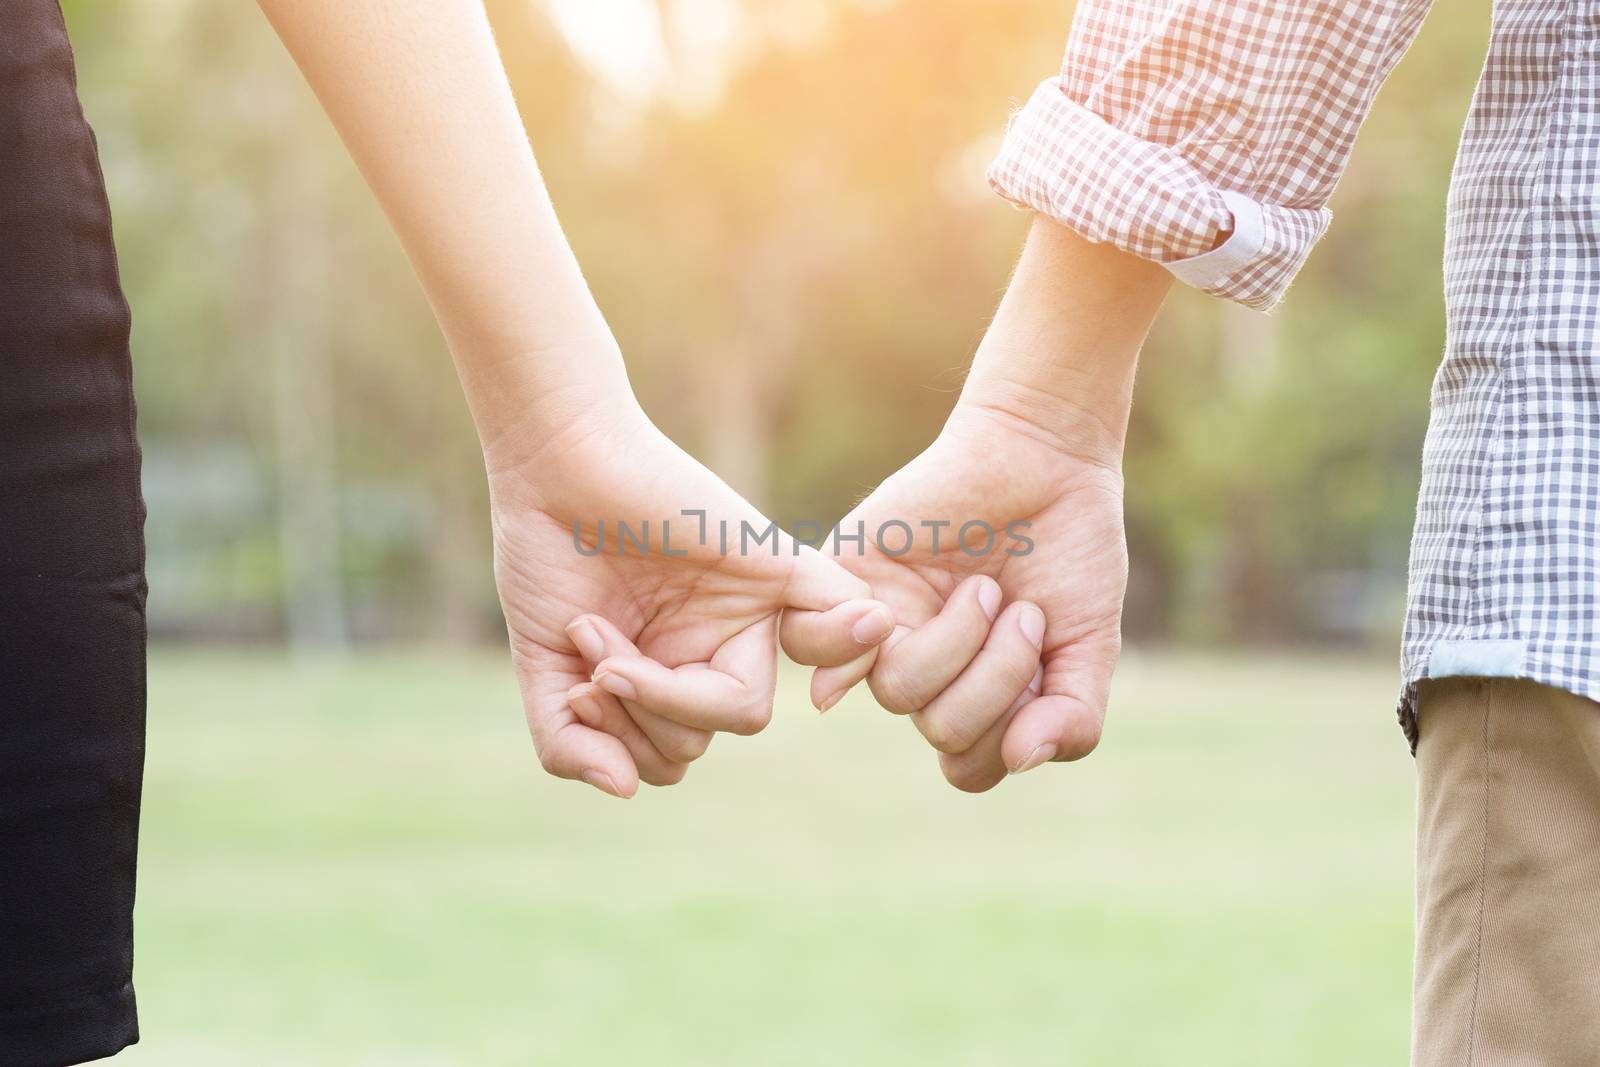 Couple lovers holding hands towards the sun with bright sun flare in parks, or close up view in a conceptual image first love and puppy love adolescent young.